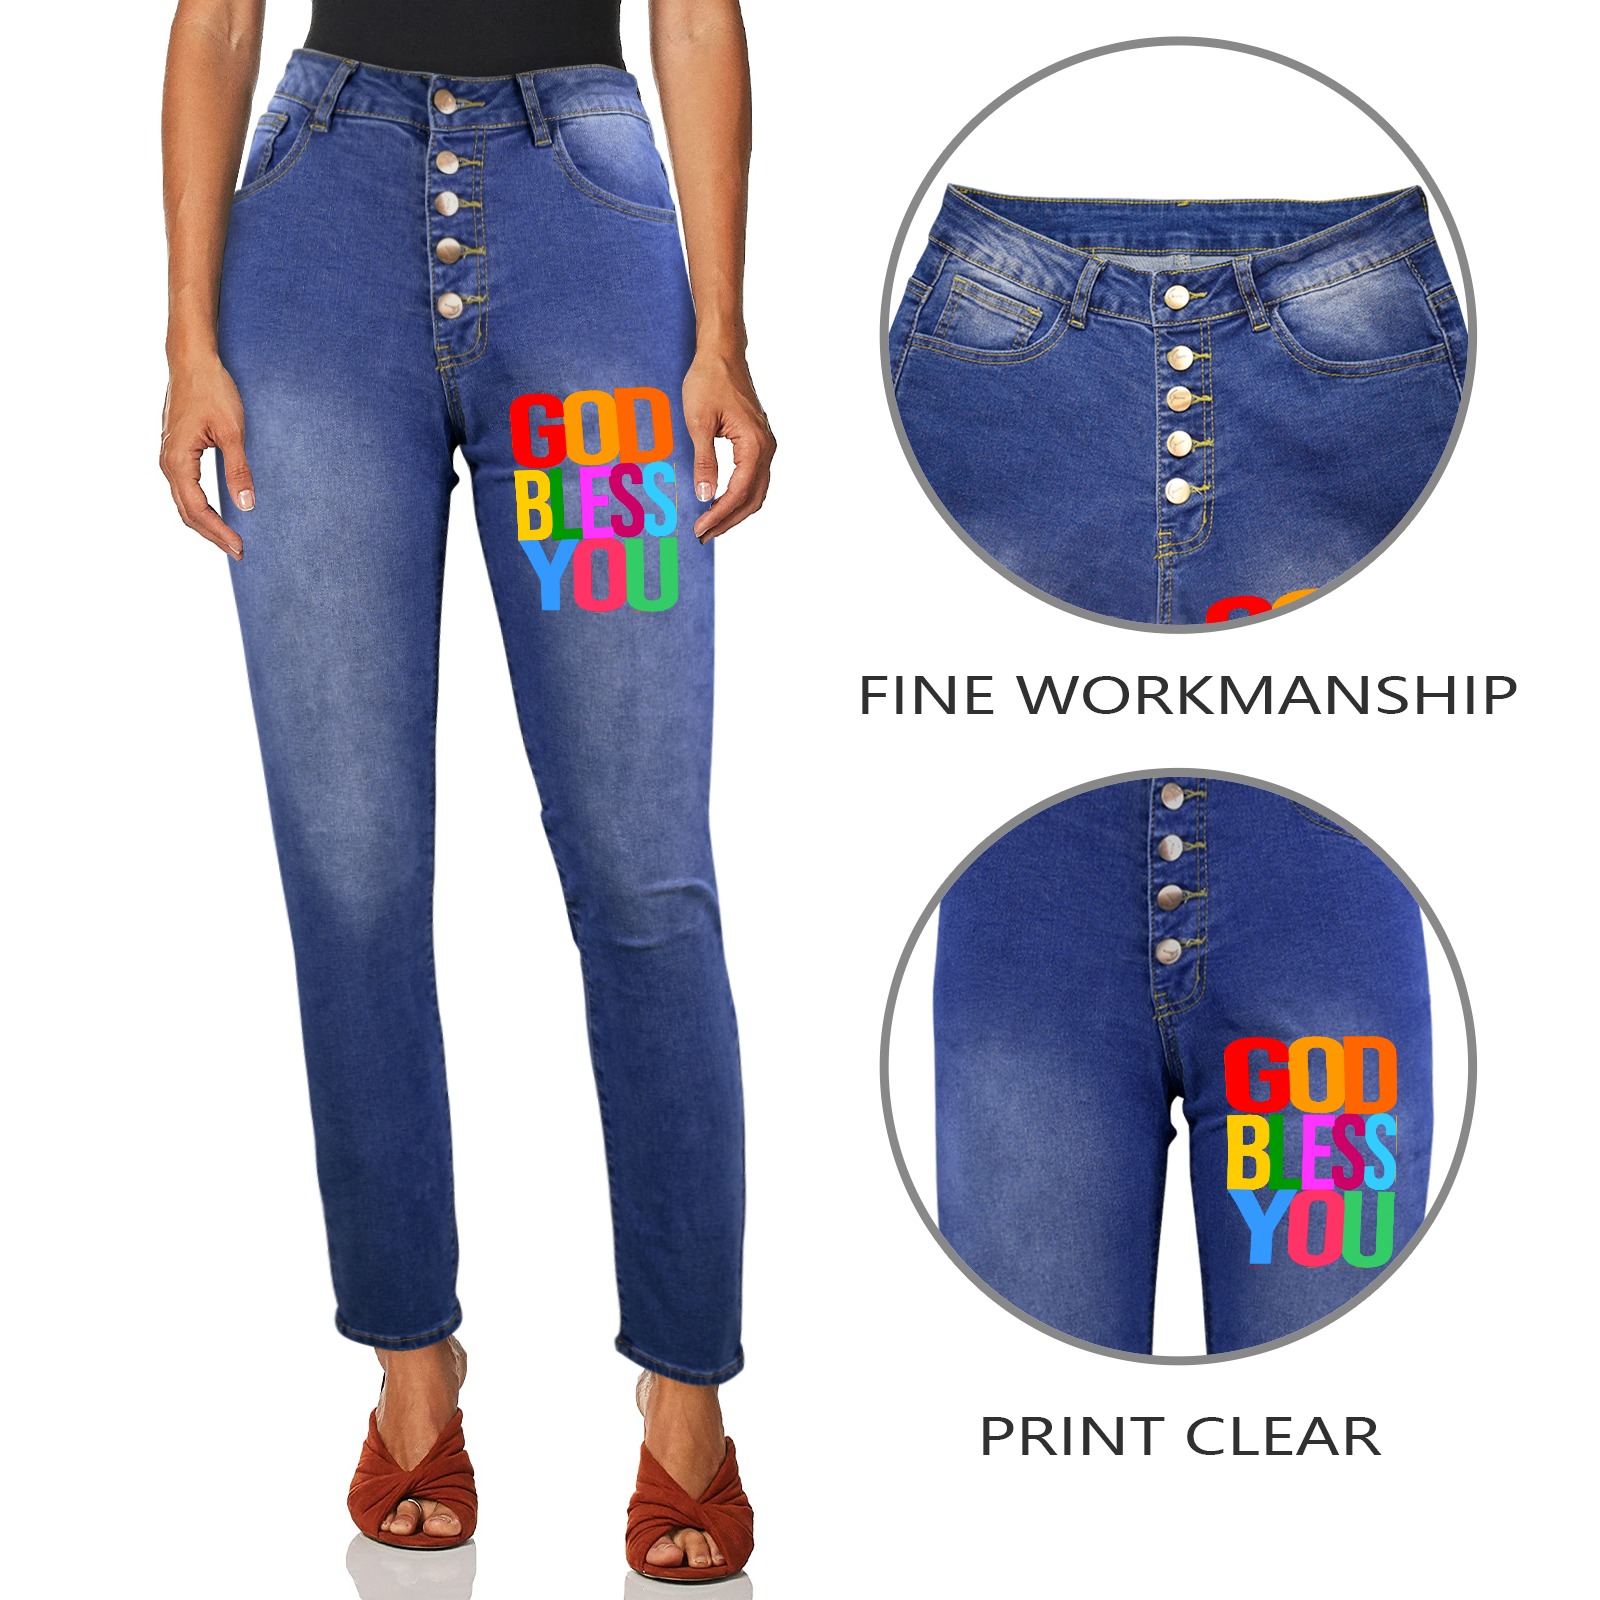 God bless you colorful text typography art. Women's Jeans (Front Printing)